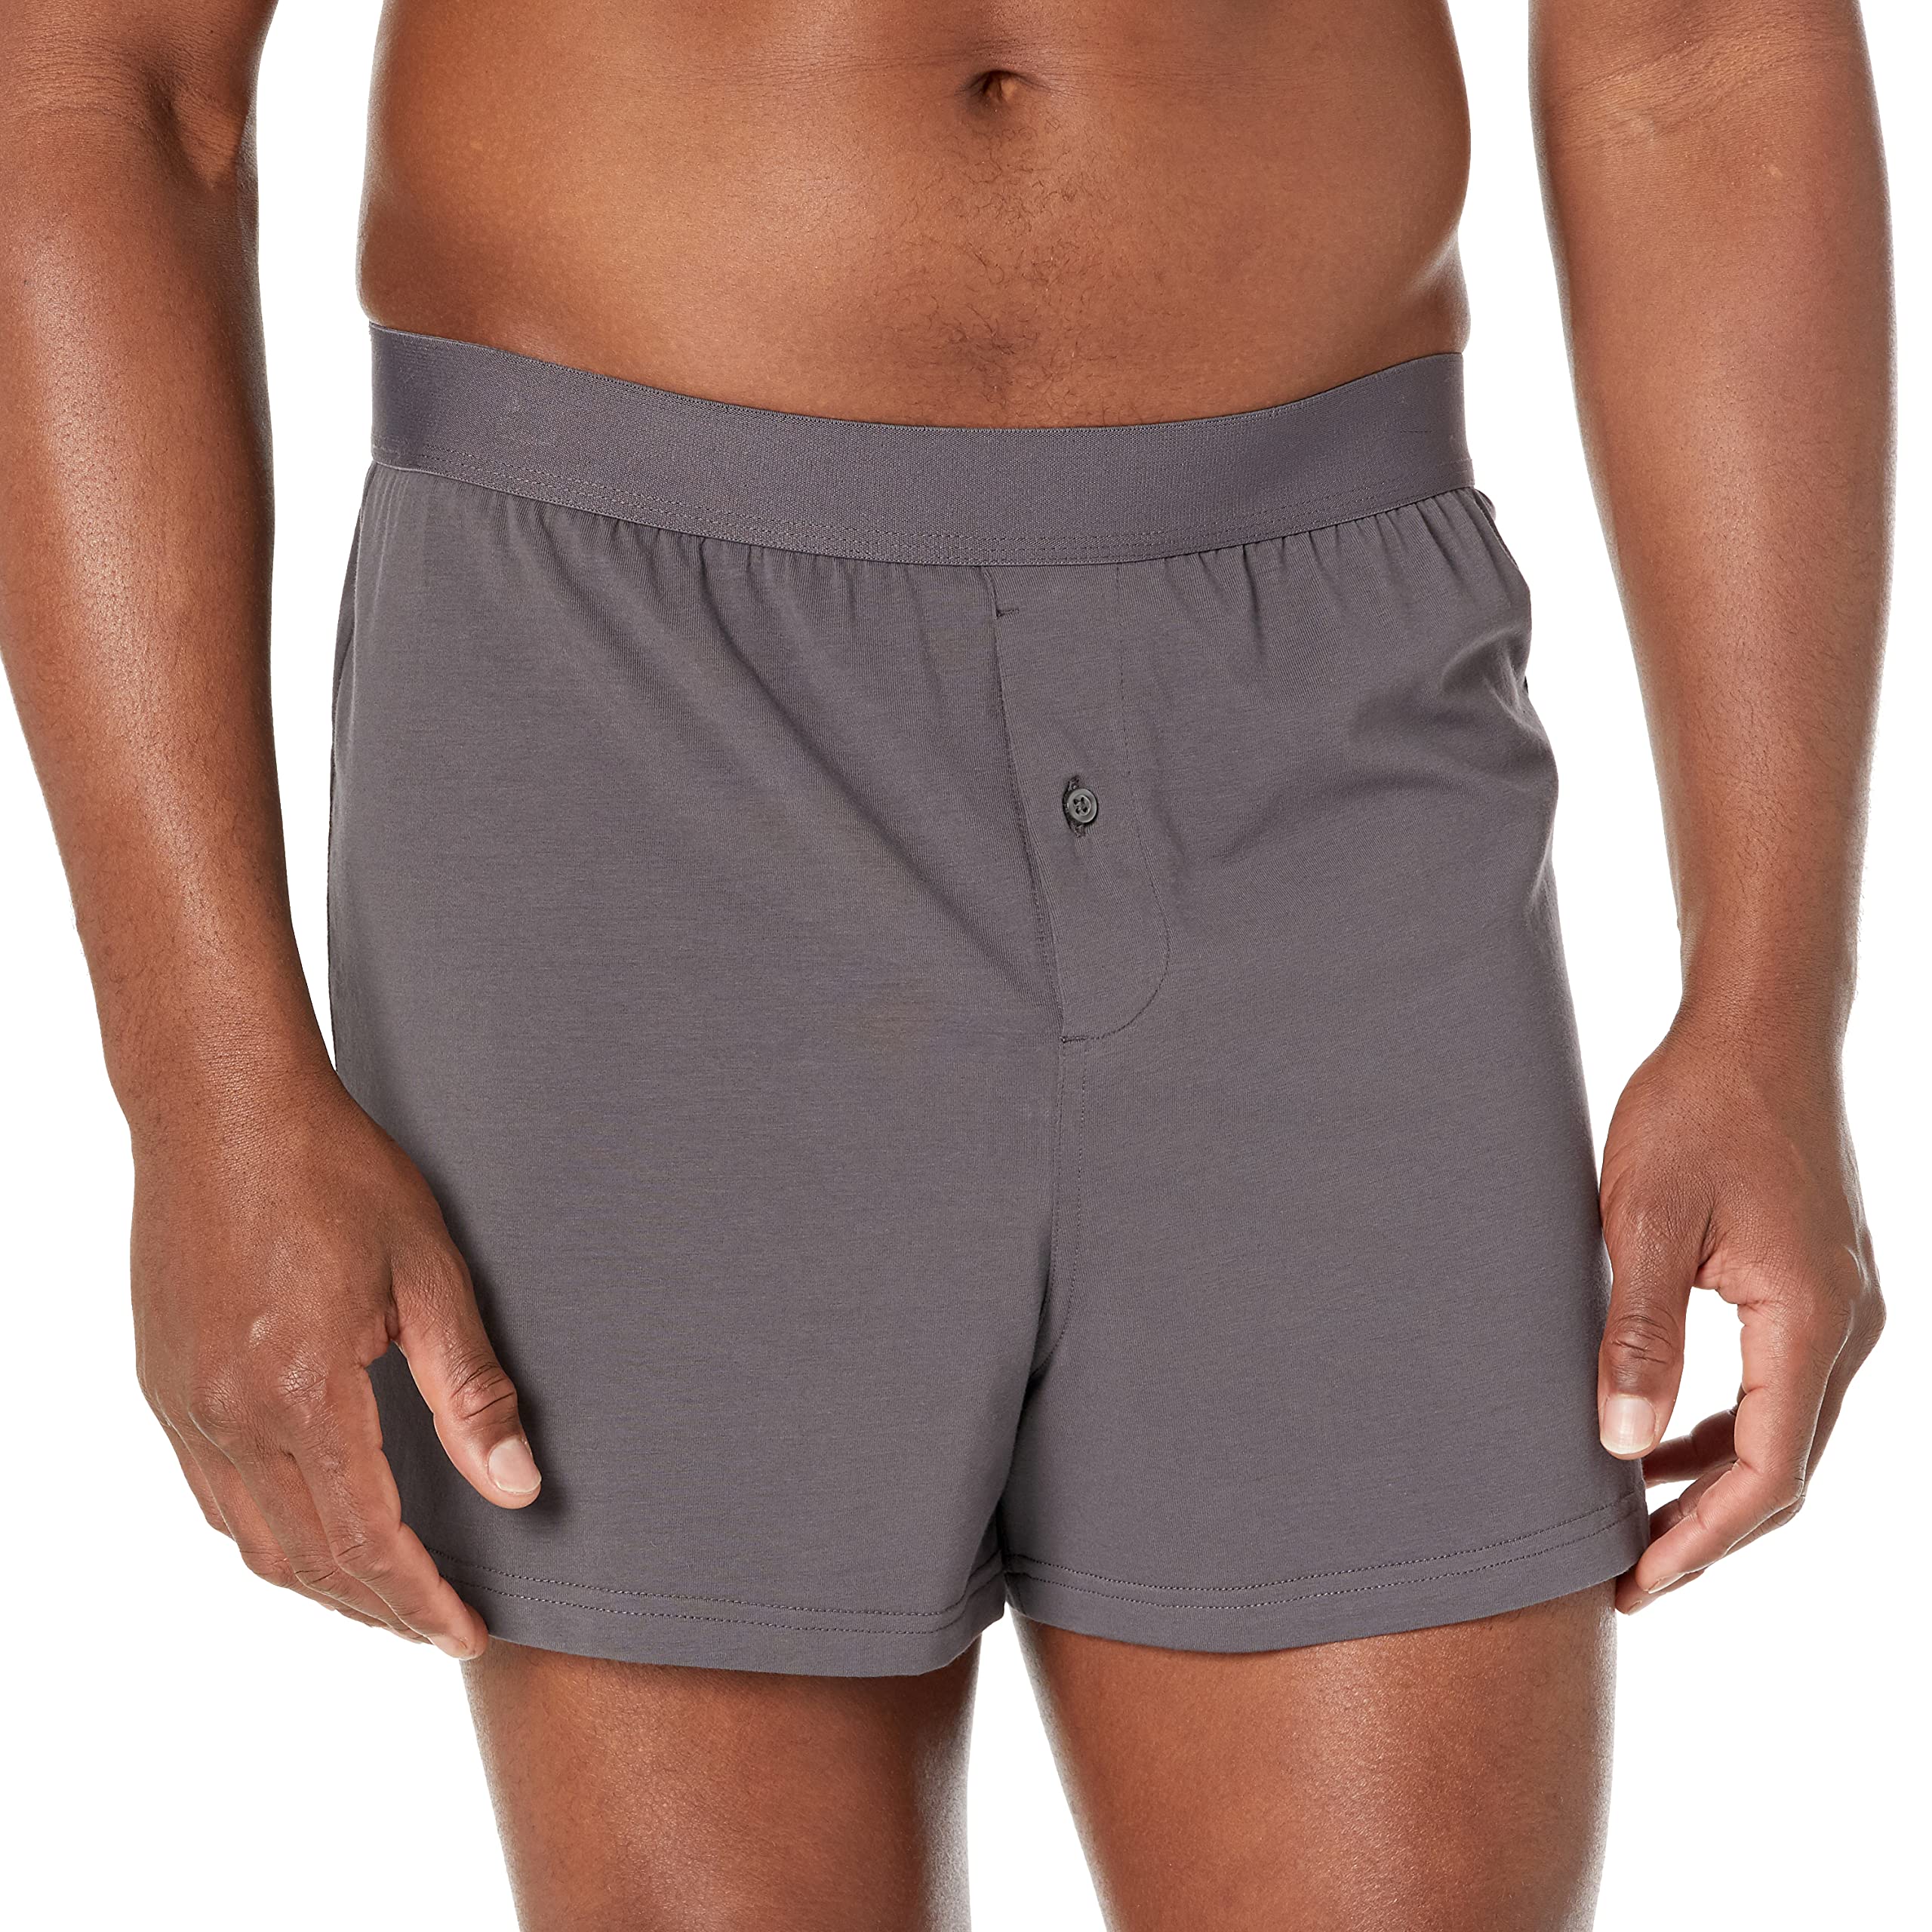 Amazon Essentials Men's Cotton Jersey Boxer Short (Available in Big & Tall), Pack of 5